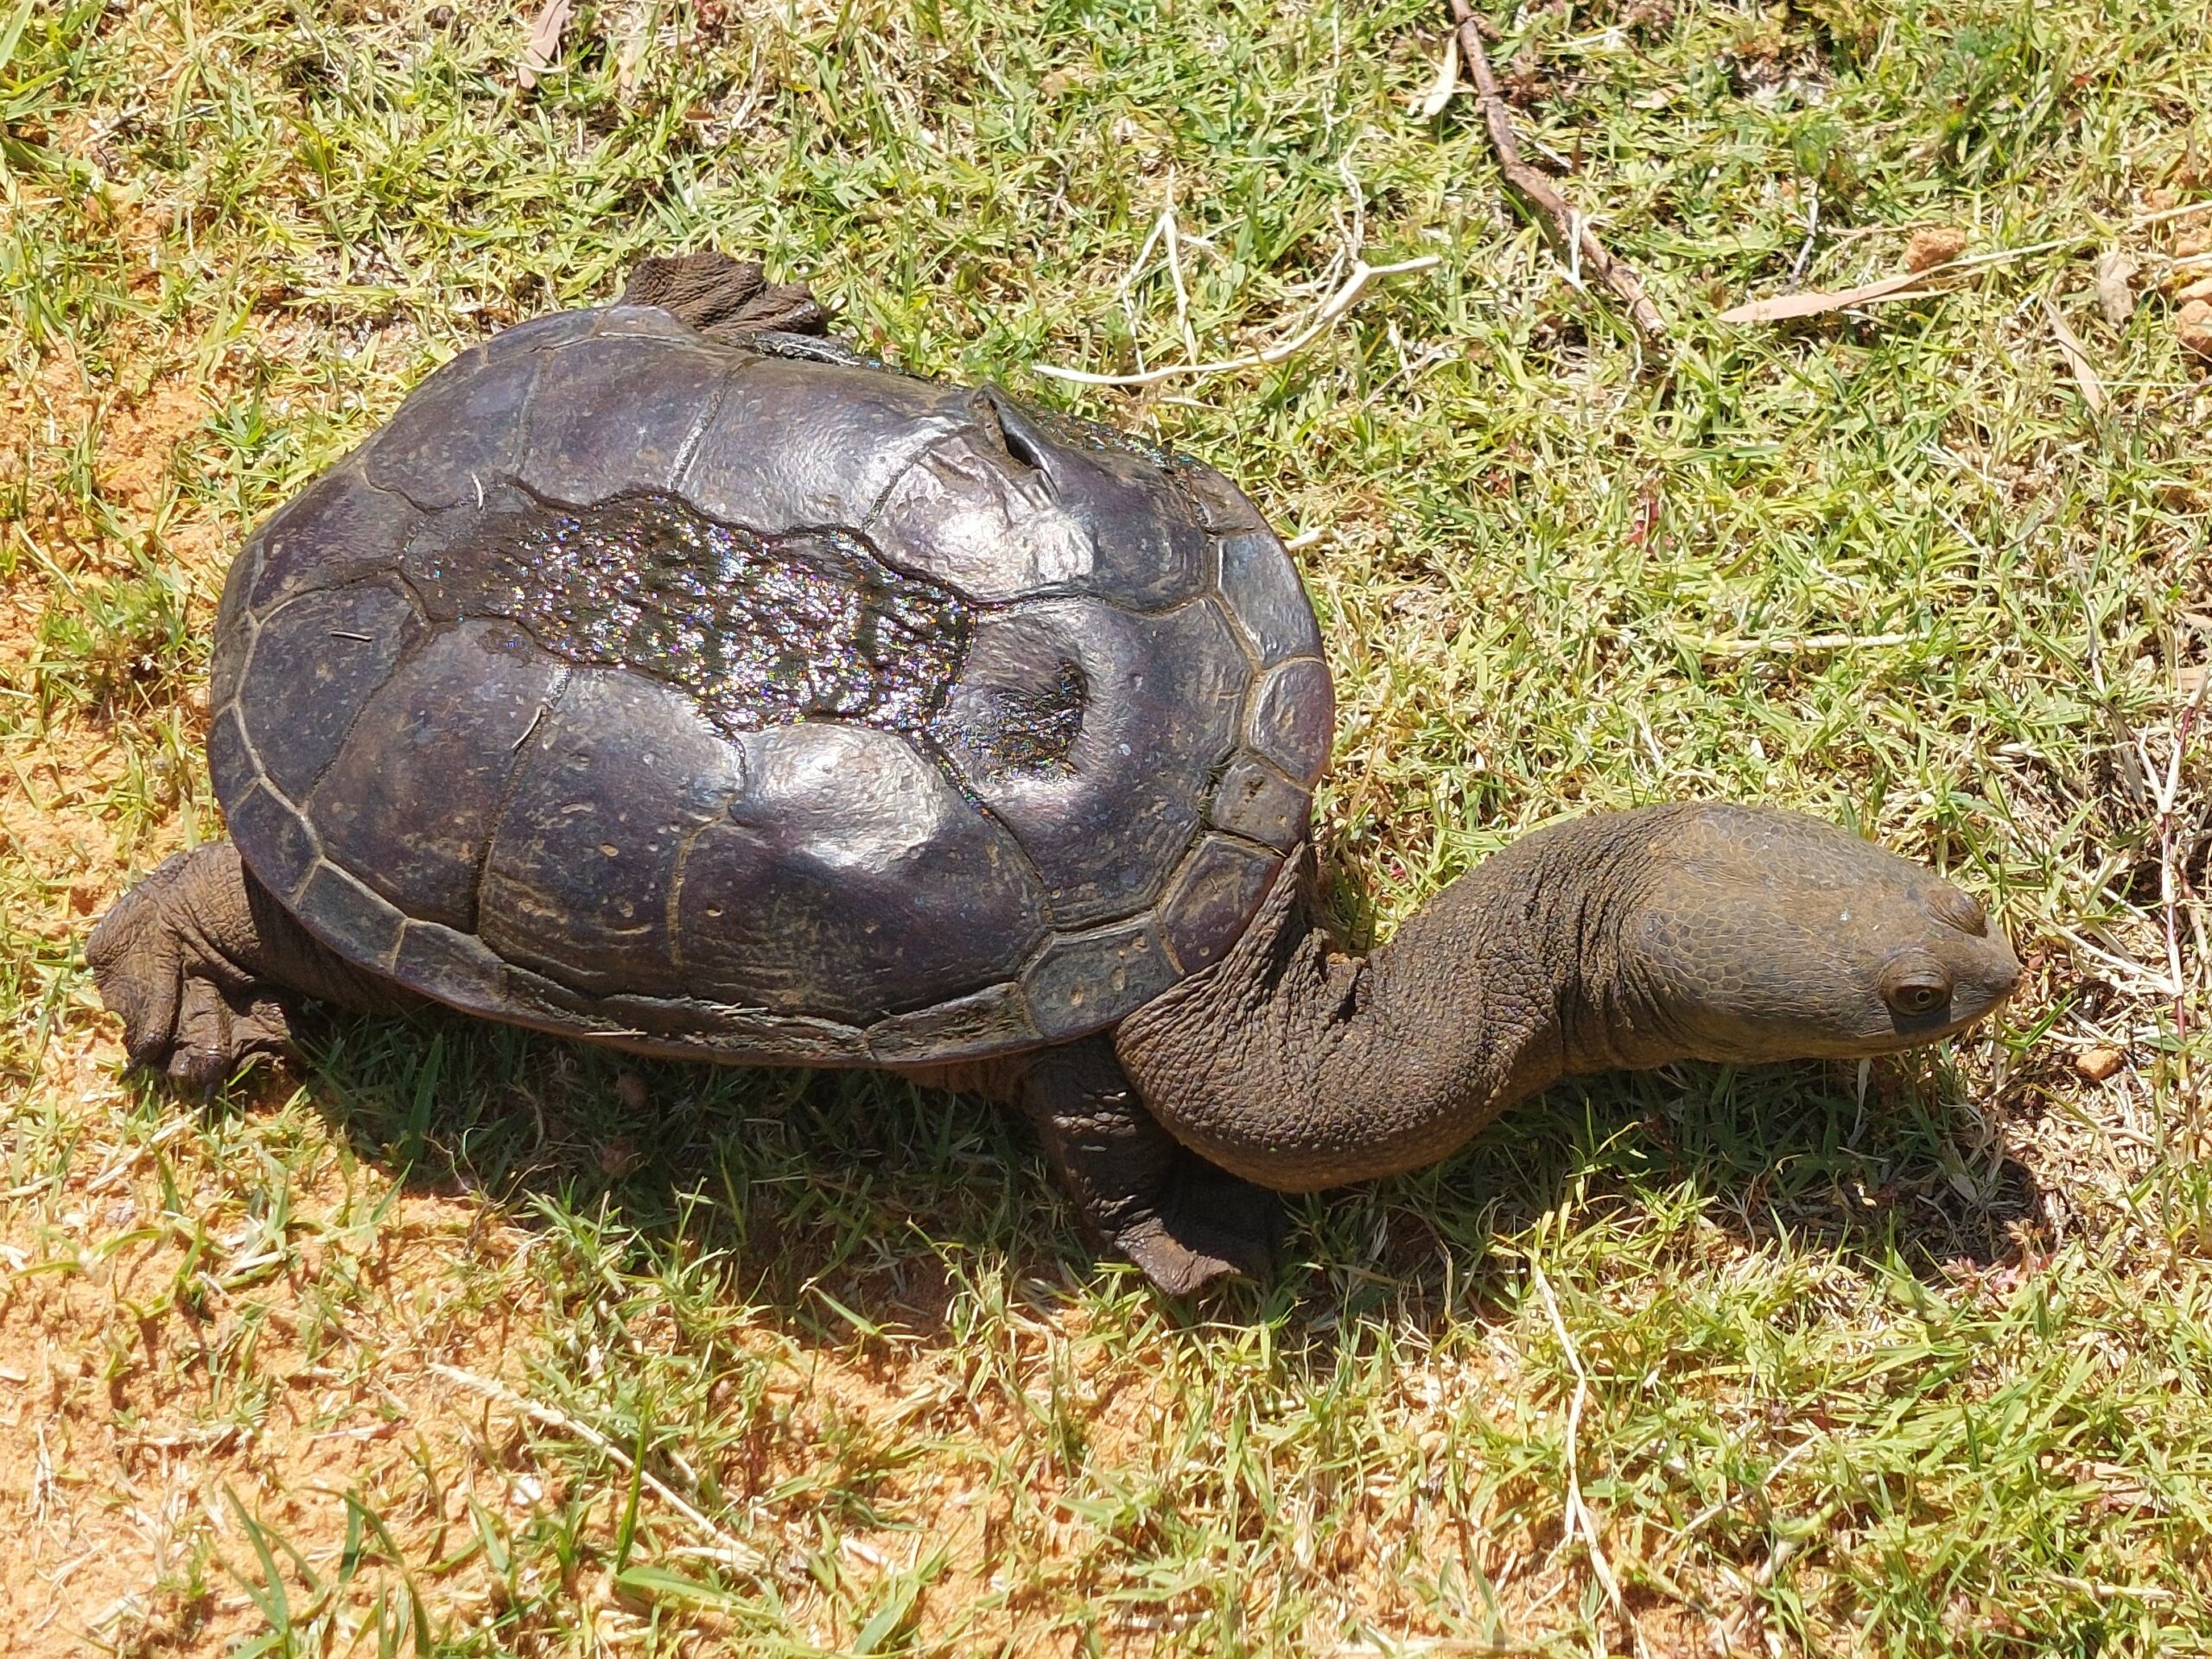 This is a photograph of a long-necked turtle taken from above. The turtle is seen walking along the grass. It is dark brown in colour and has a hard, oval shell. The top of its shell is wet and is glistening in the sun.